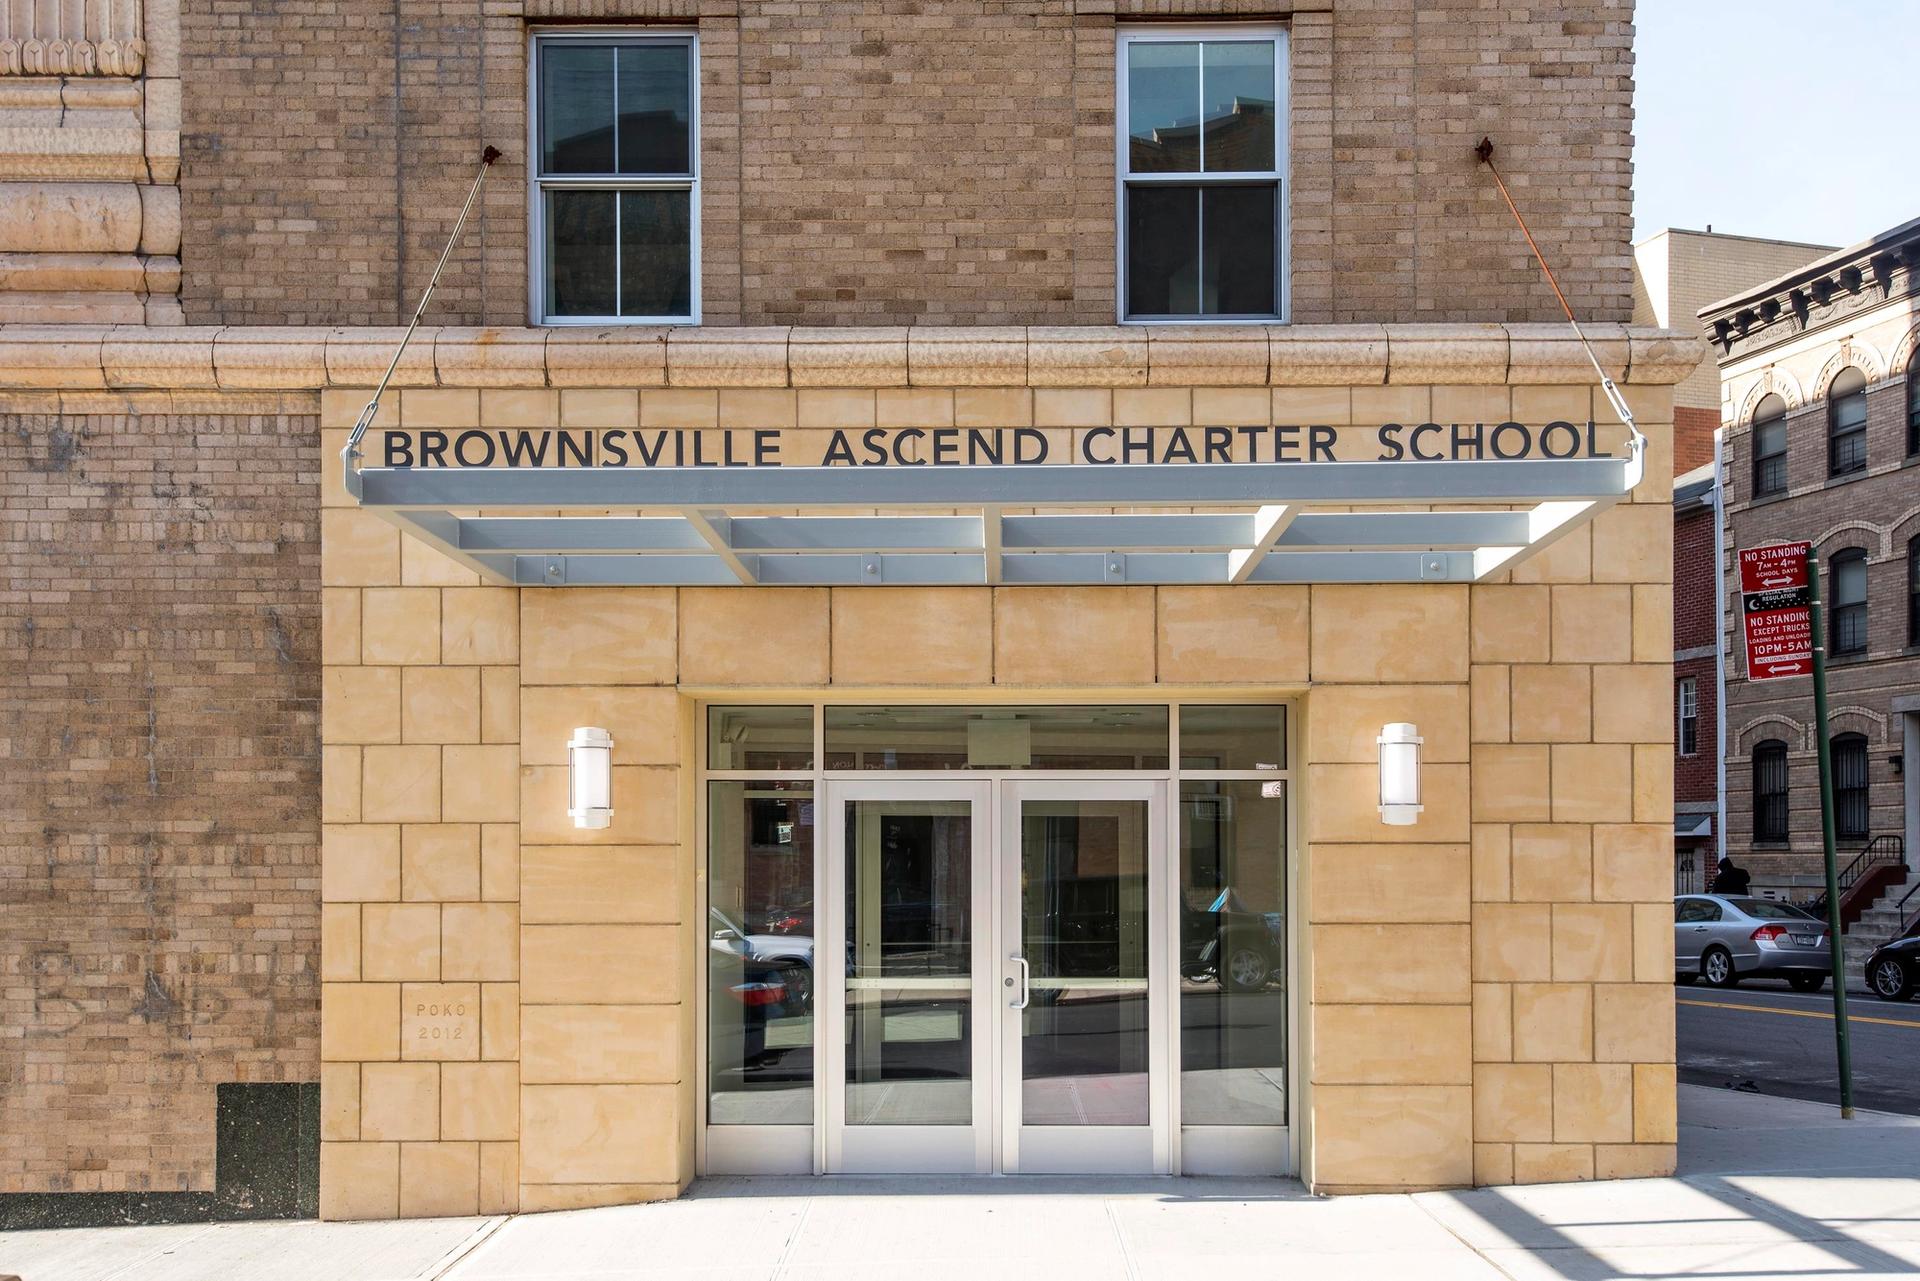 Public Charter Middle School in Brownsville, Brooklyn Ascend